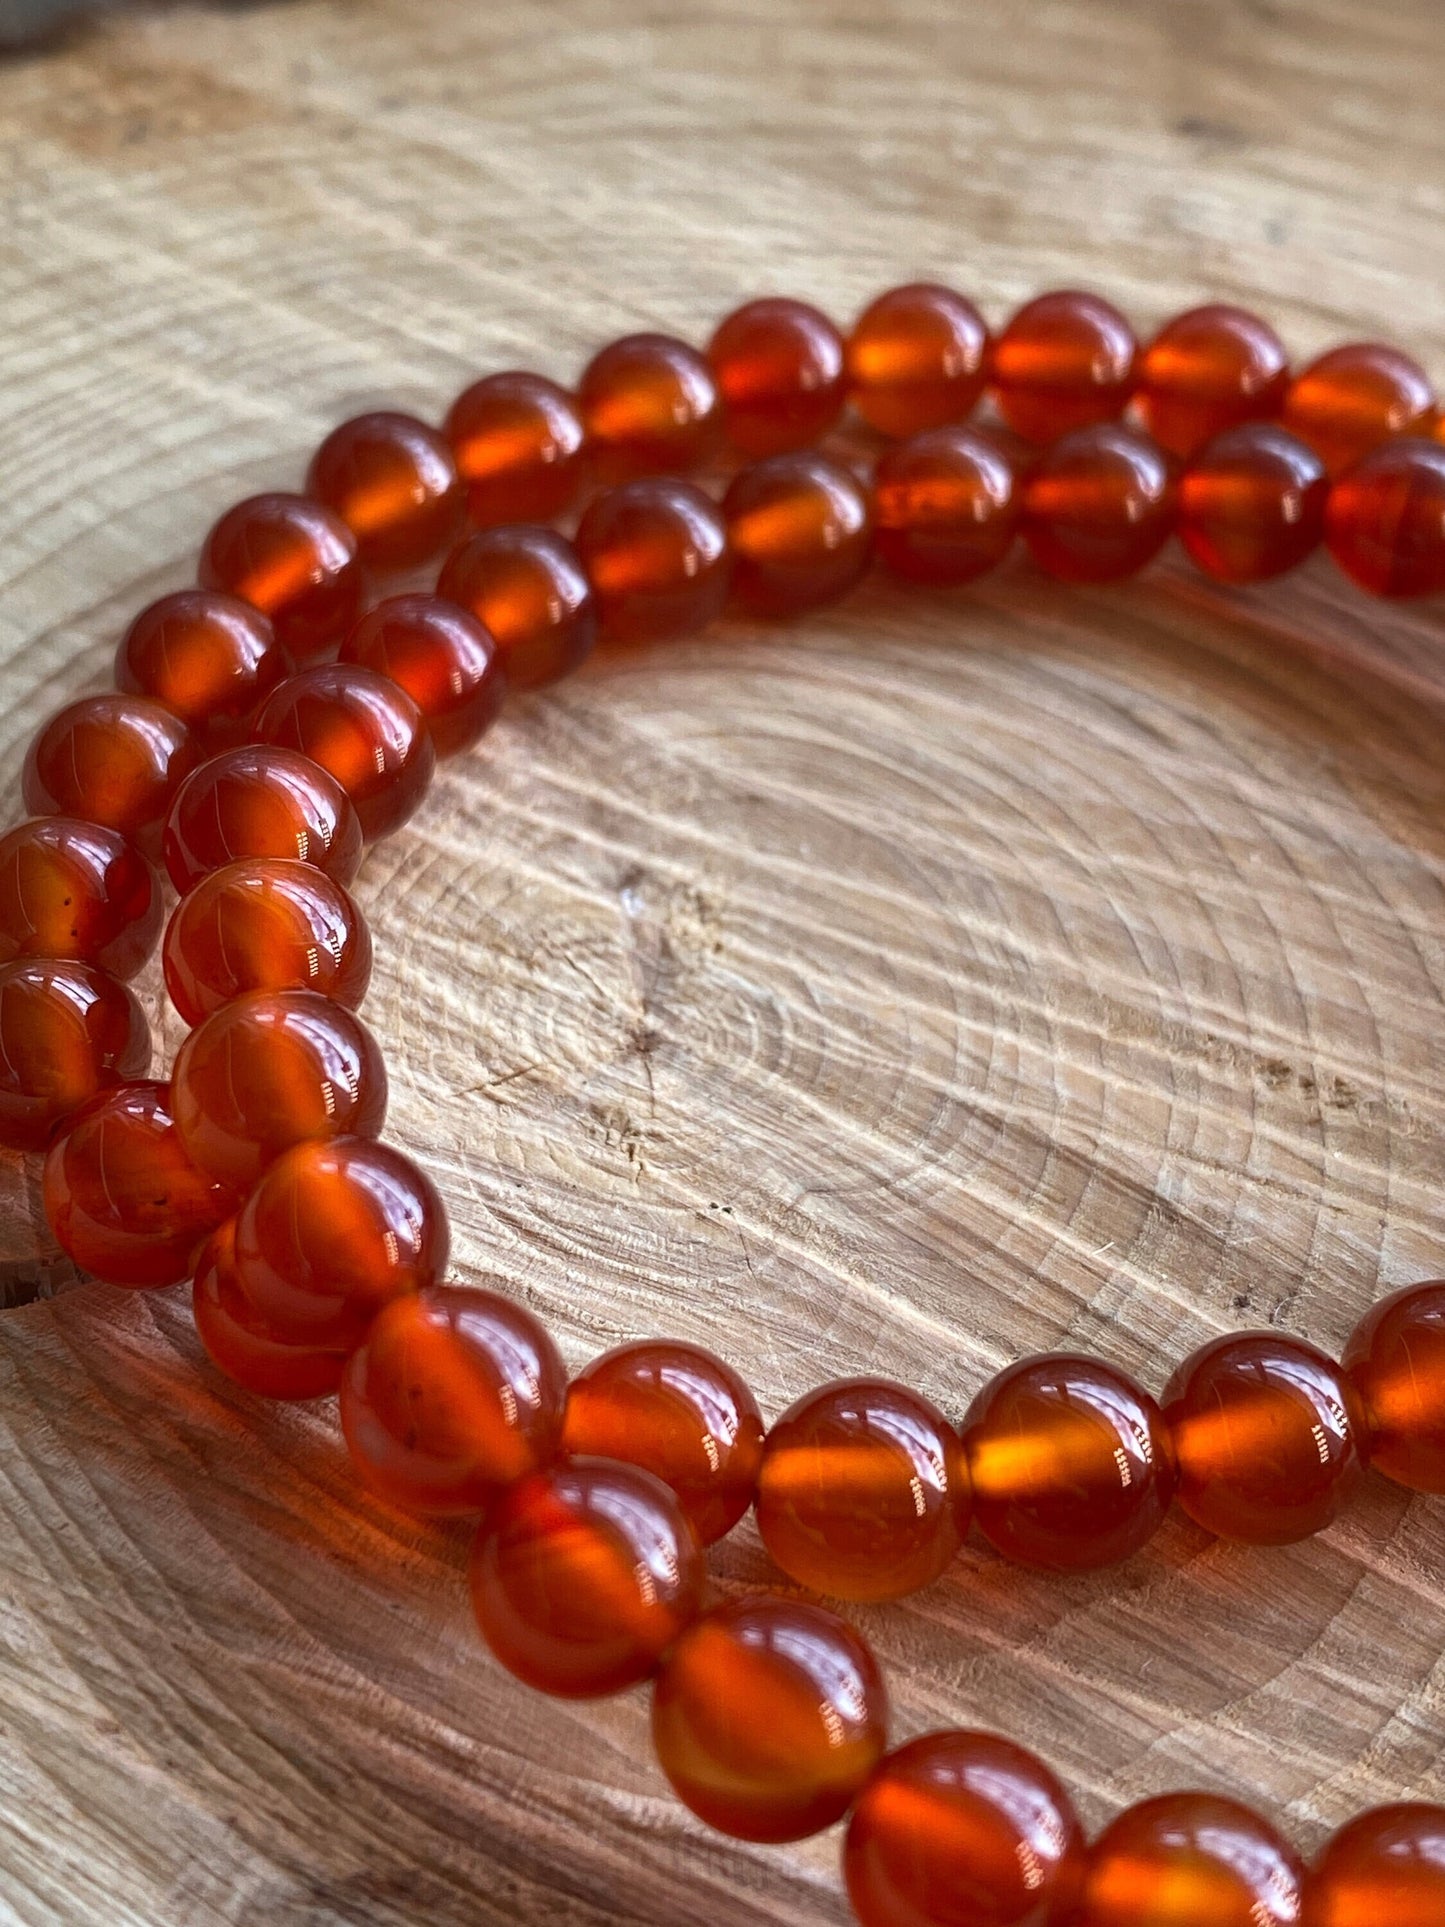 Carnelian Crystal Bracelet, Crystal for passion, love, creativity,  Root chakra crystal.